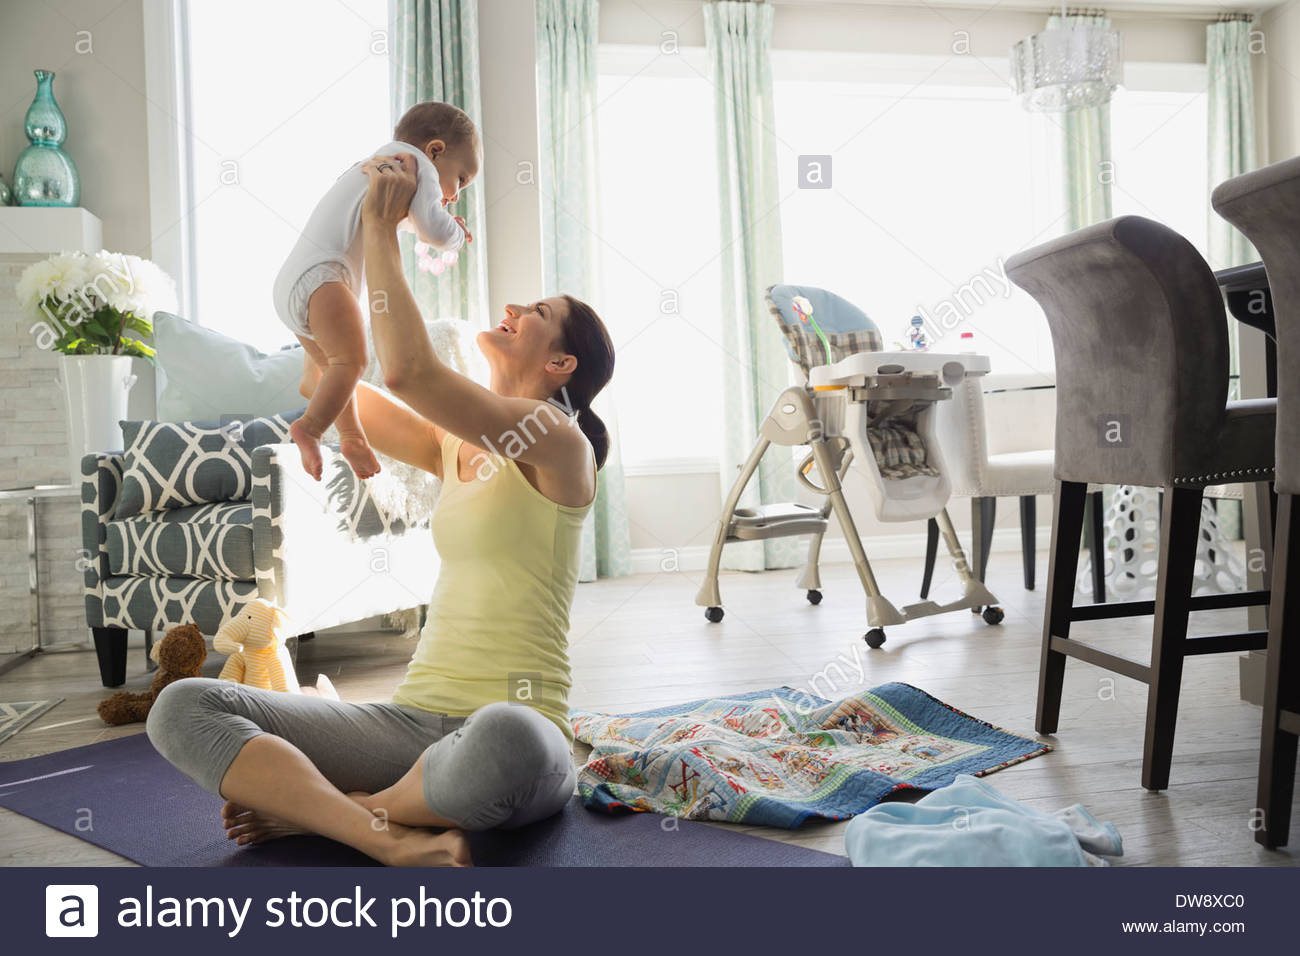 Fit mother lifting baby on exercise mat at home Stock Photo